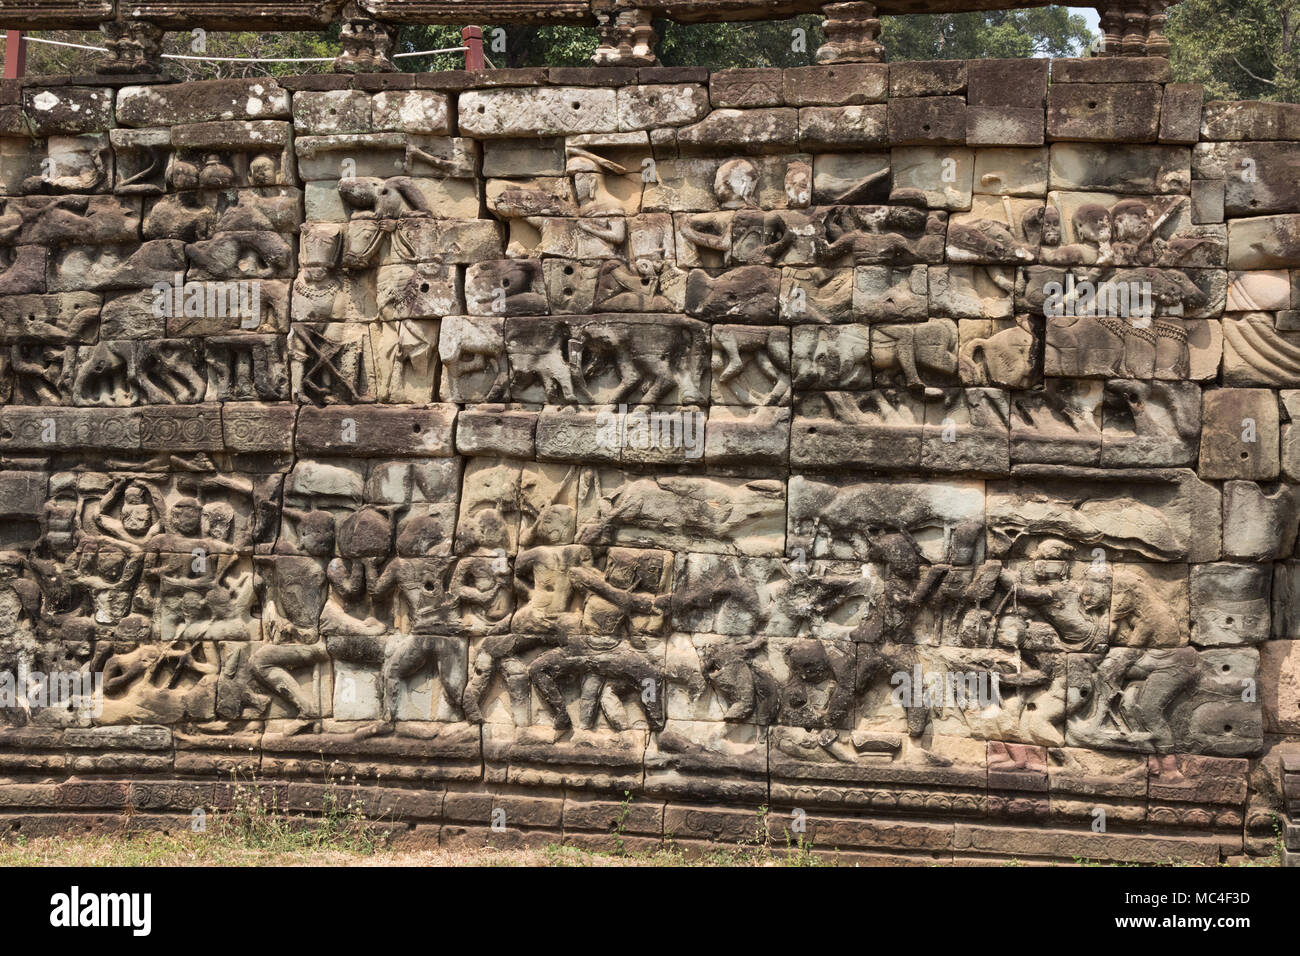 Ancient carvings at the Leper King terrace, Angkor Thom, Angkor UNESCO World heritage site, Cambodia, Asia Stock Photo